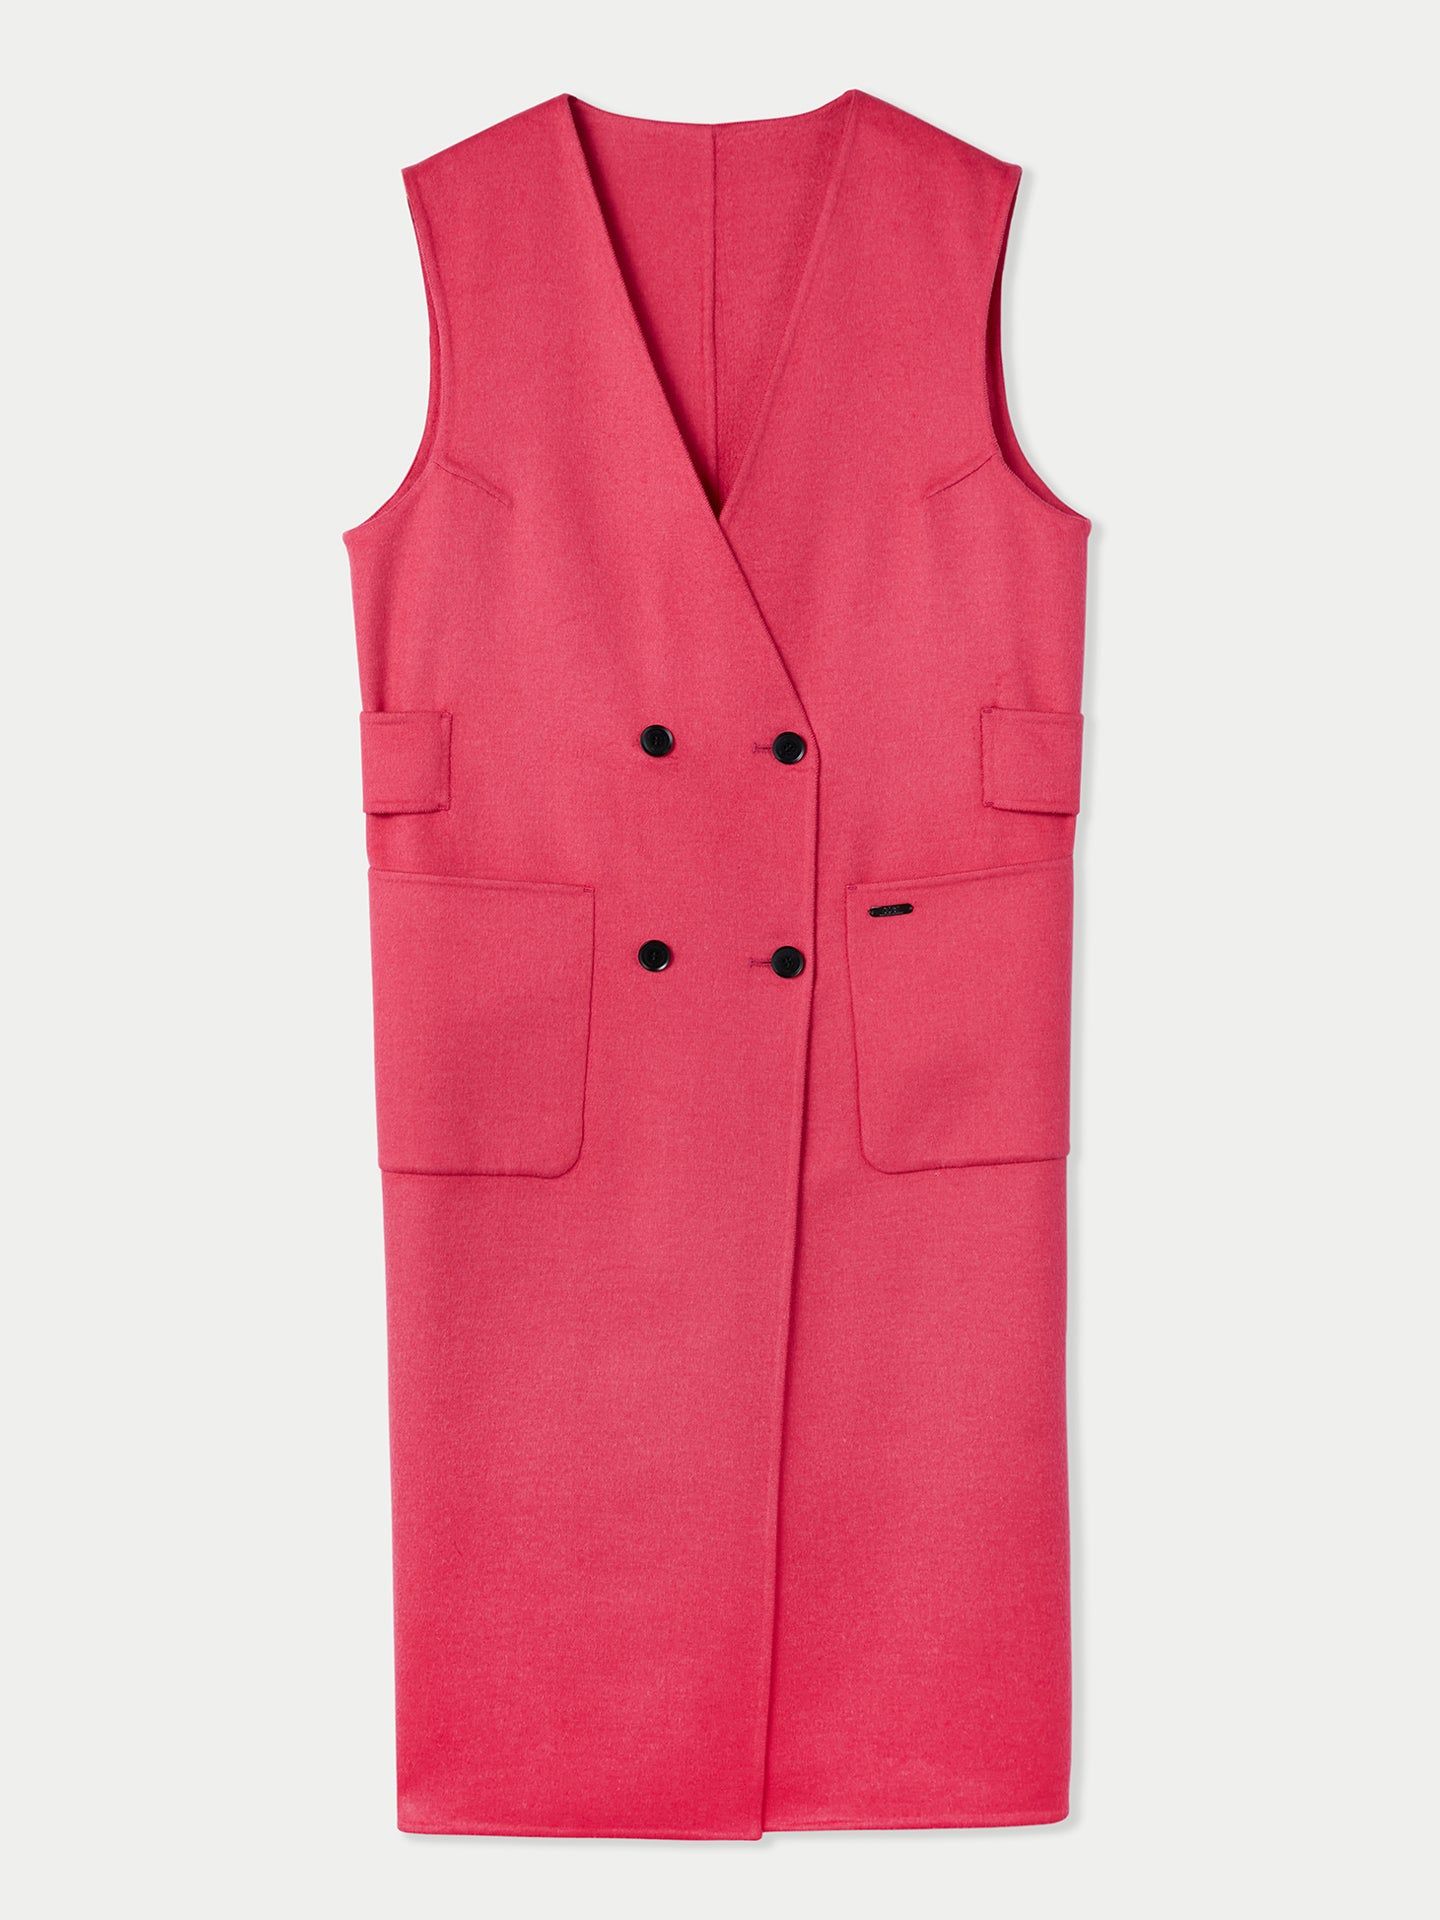 Women's Cashmere Double Breasted Vest Red Rose - Gobi Cashmere